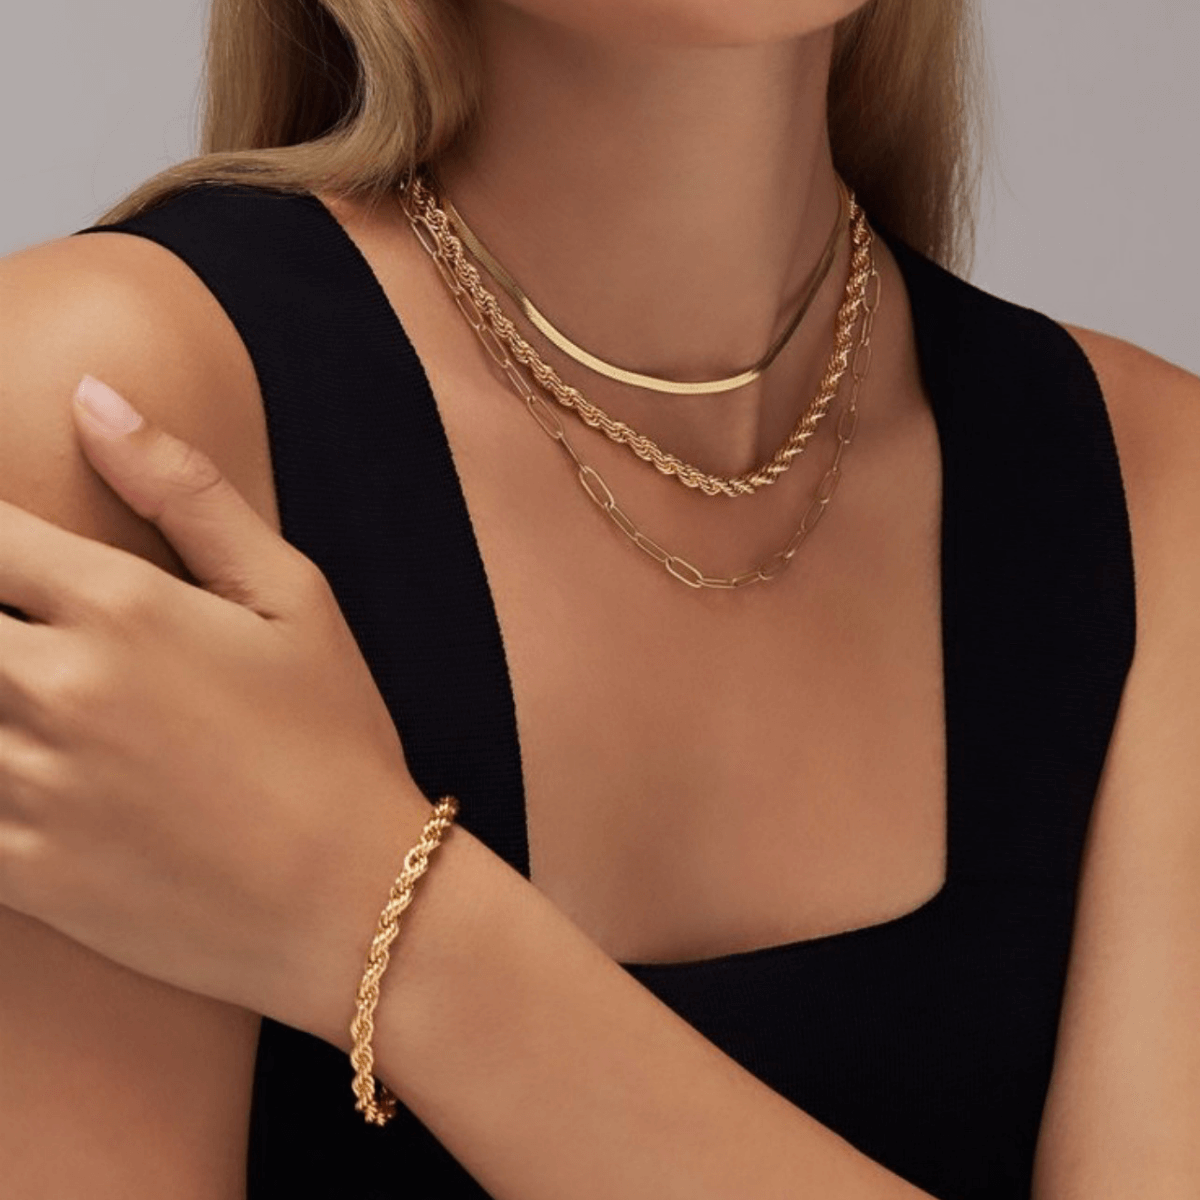 #1 Best Gold Link Chain Bracelet Jewelry Gift for Women | Trending Gold Link Bracelet Chain Jewelry Gift for Women, Girls, Girlfriend, Mother, Wife